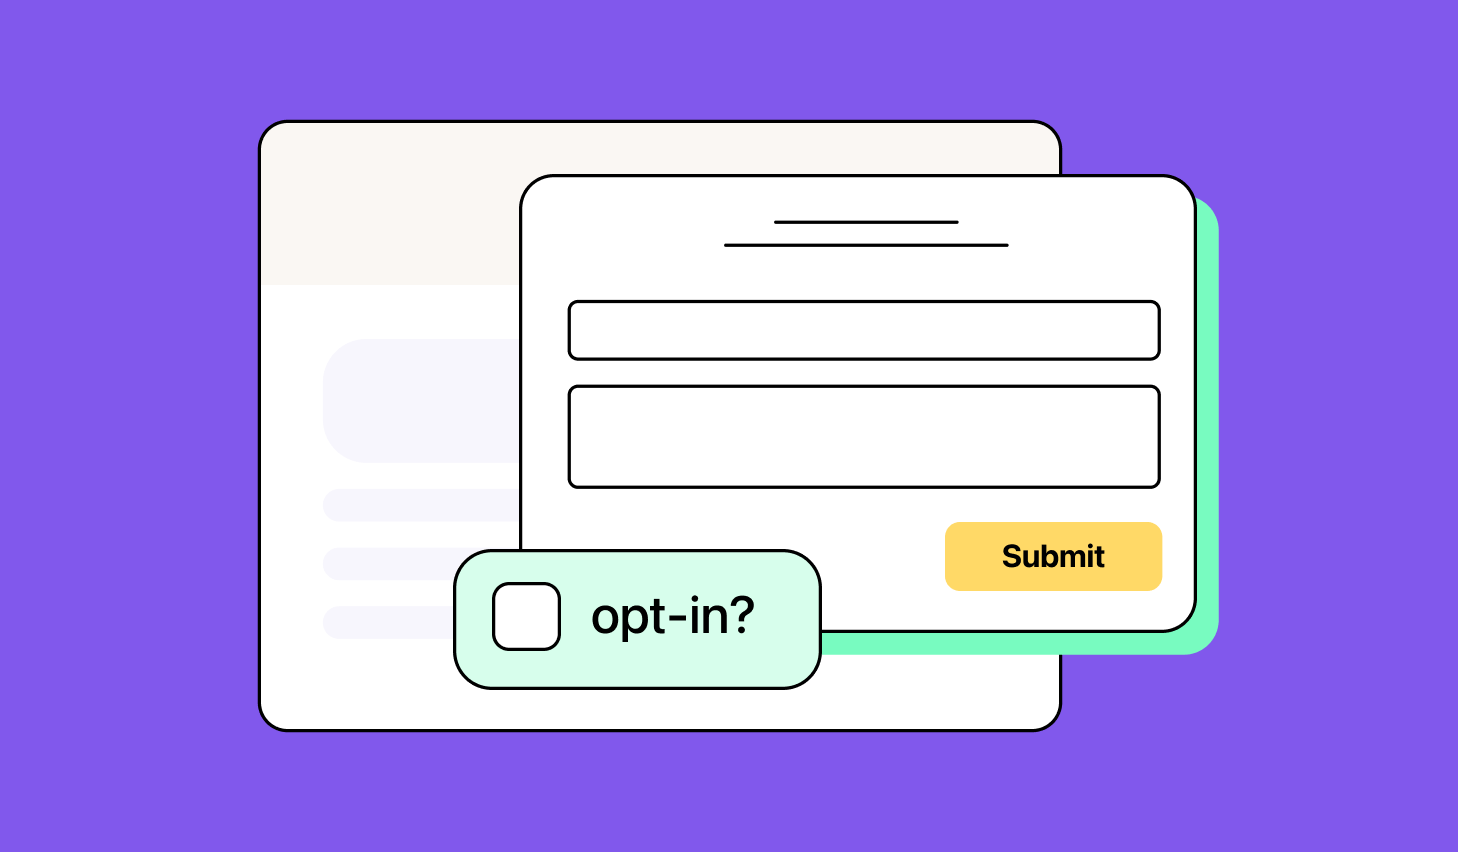 Illustration with a form containing fields, an opt-in checkbox, and a submit button.